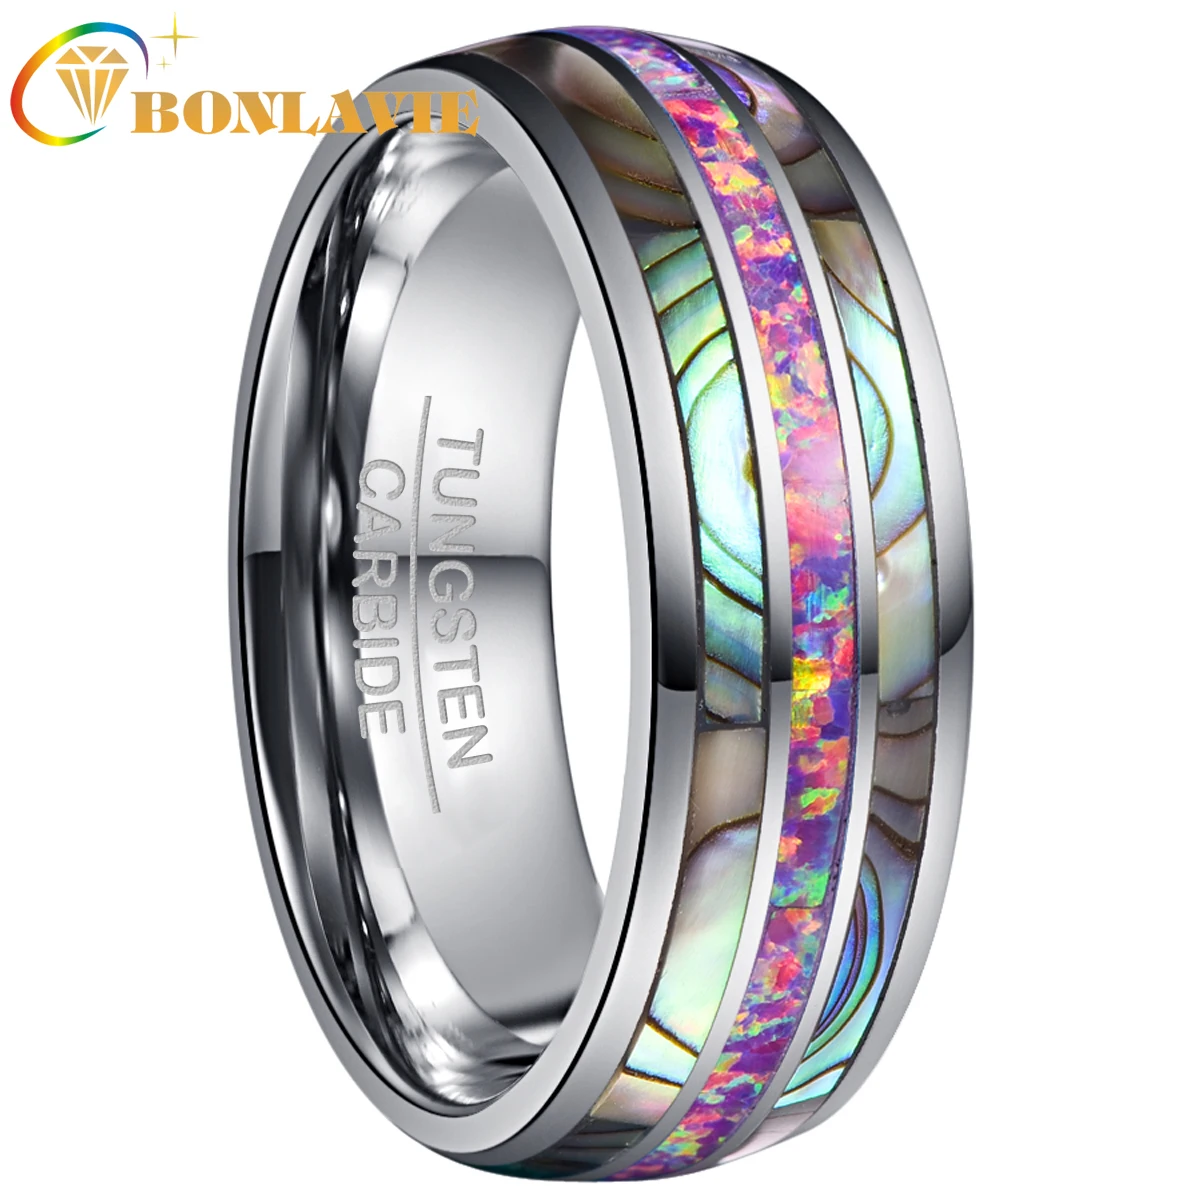 

BONLAVIE 8mm Tungsten Carbide Ring Dome Inlaid Acacia Purple Opal Ring For Women Mens Silver Color Finger Ring